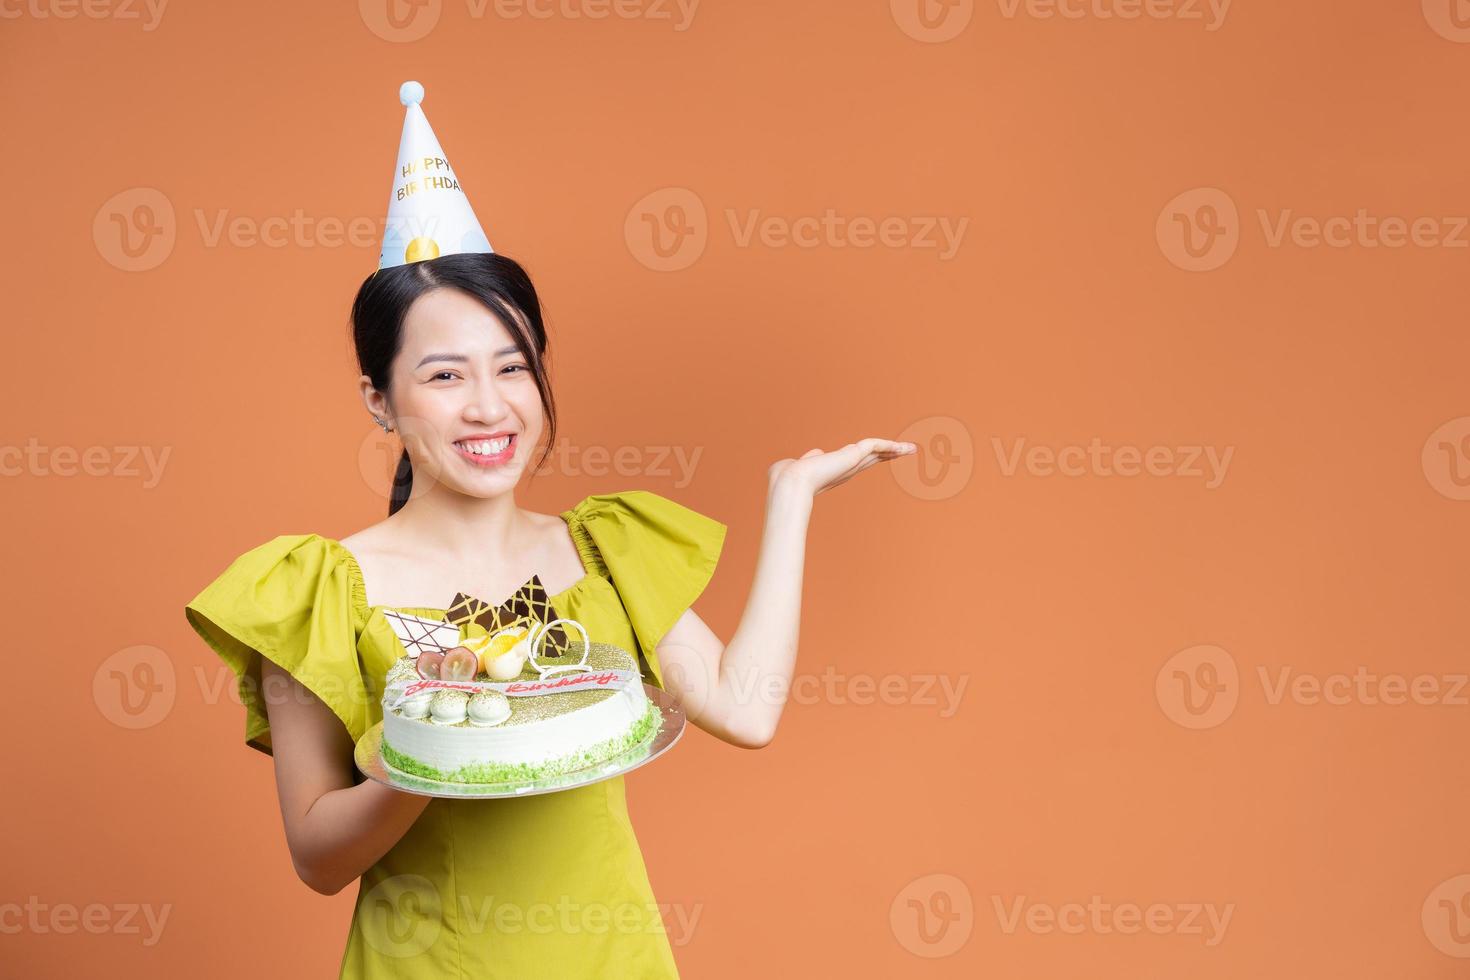 Young Asian woman holding birthday cake photo